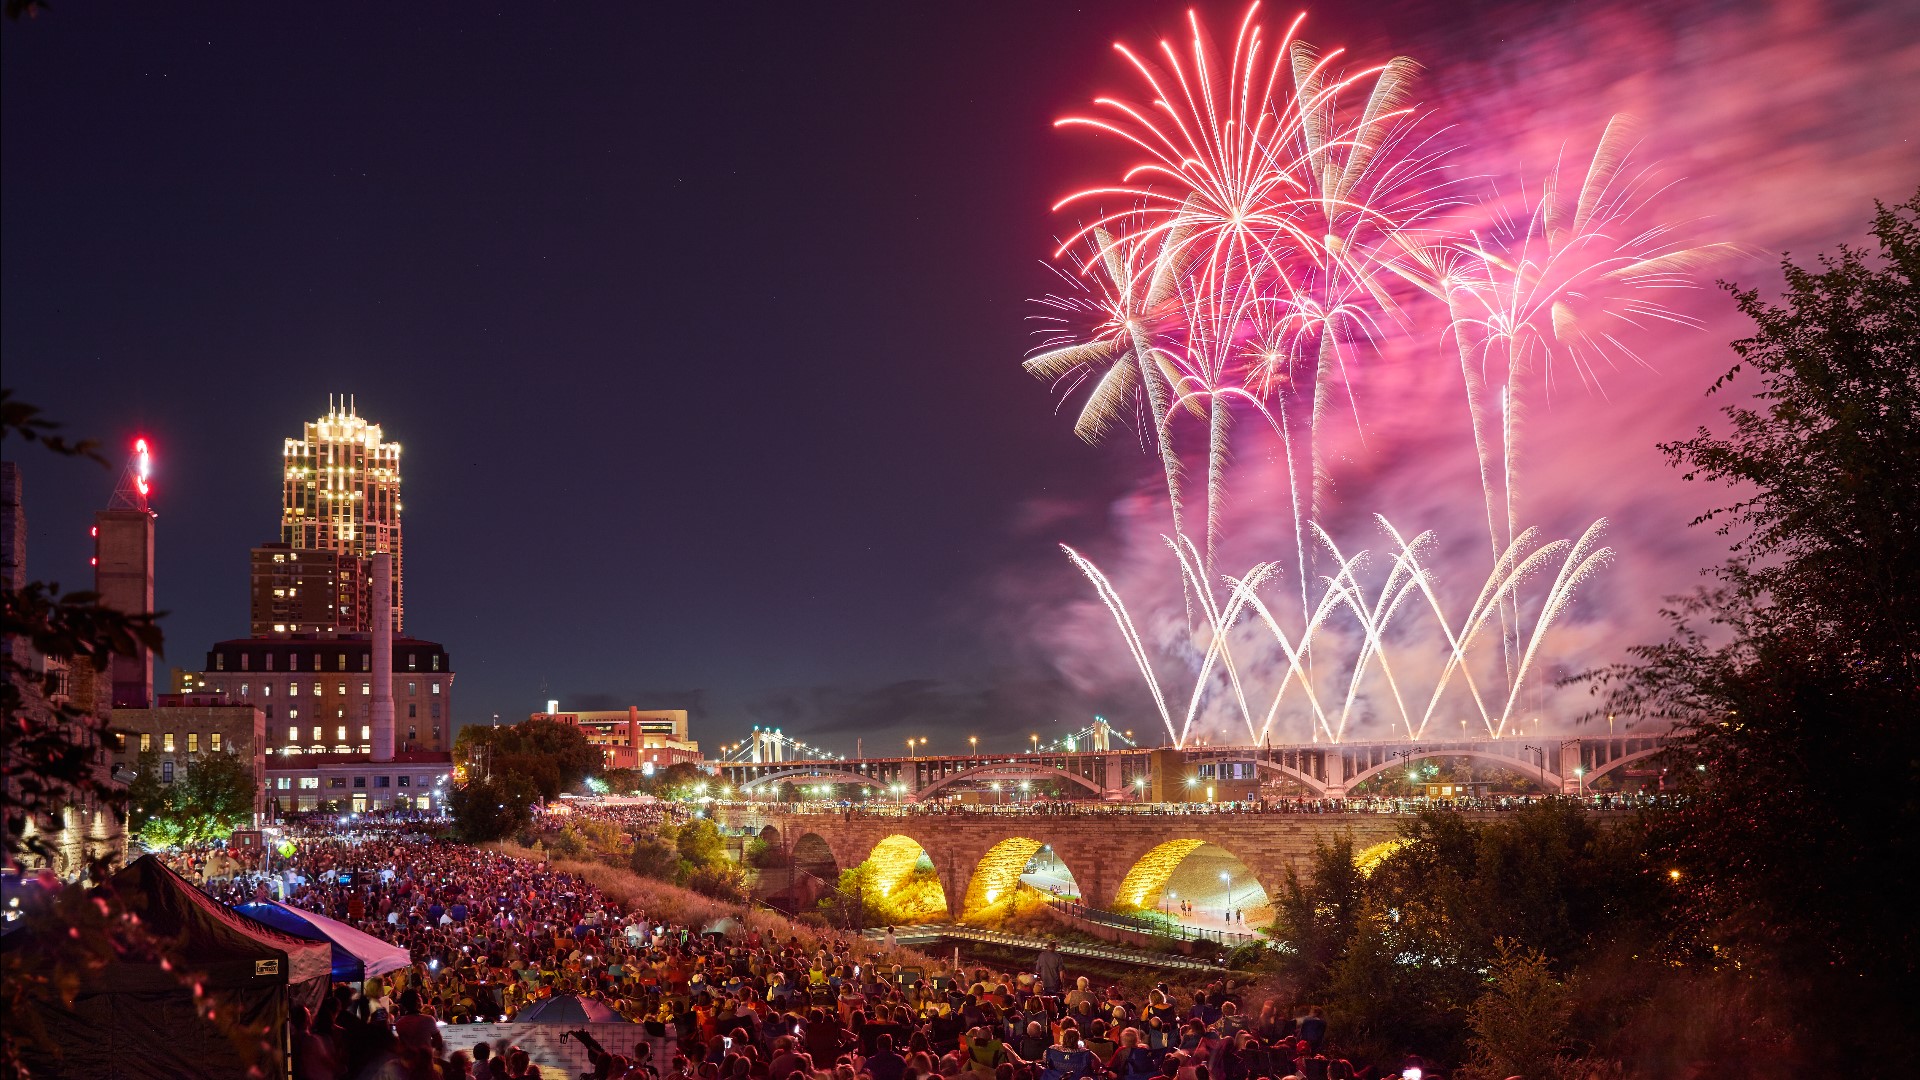 The annual Minneapolis Aquatennial celebration is back in person this year after going virtual in 2020 due to the pandemic.